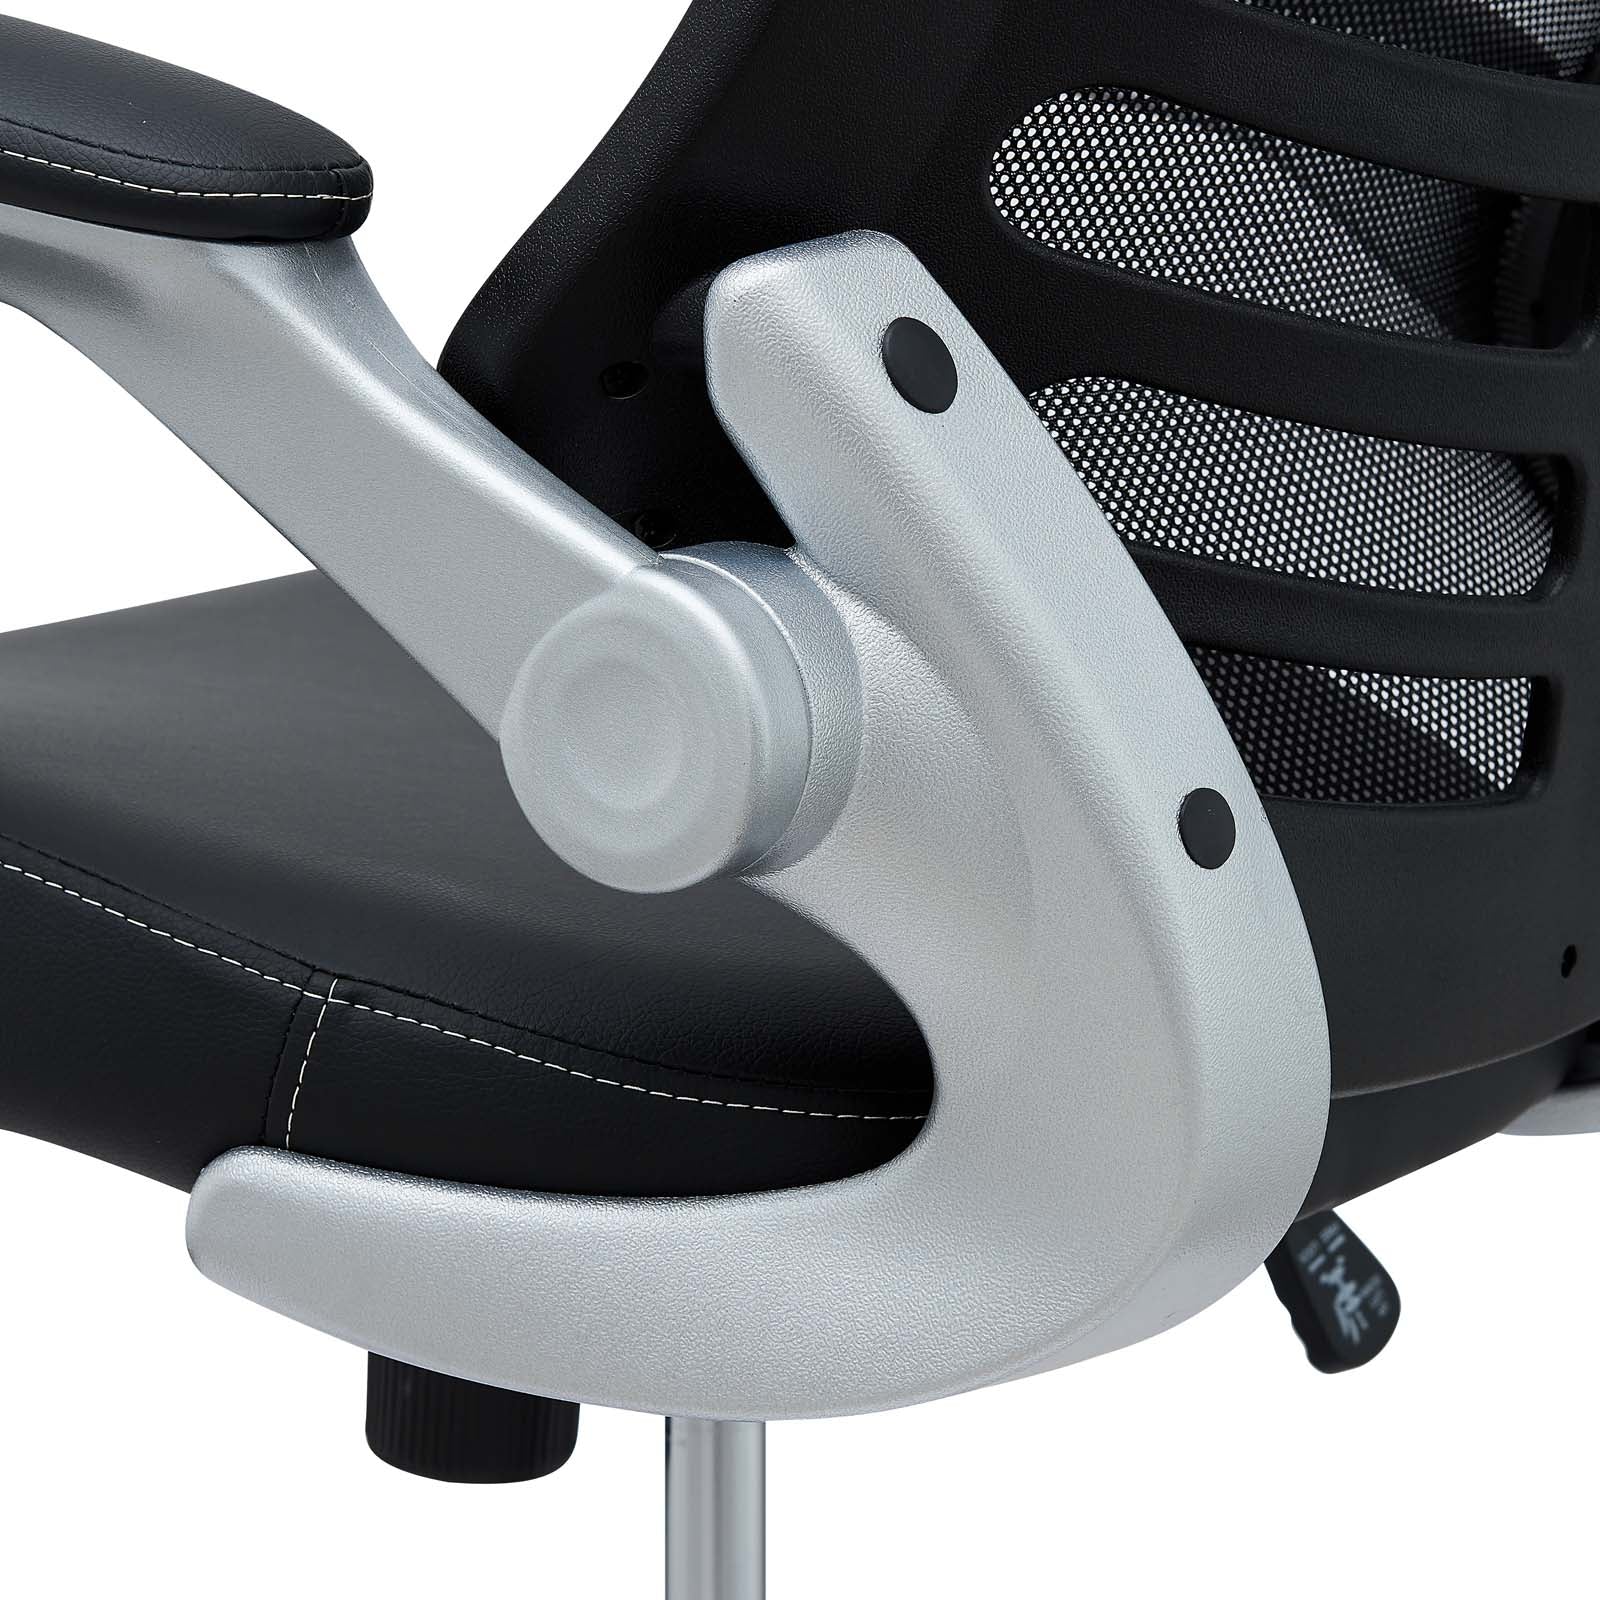 Modway Task Chairs - Attainment Office Chair Black